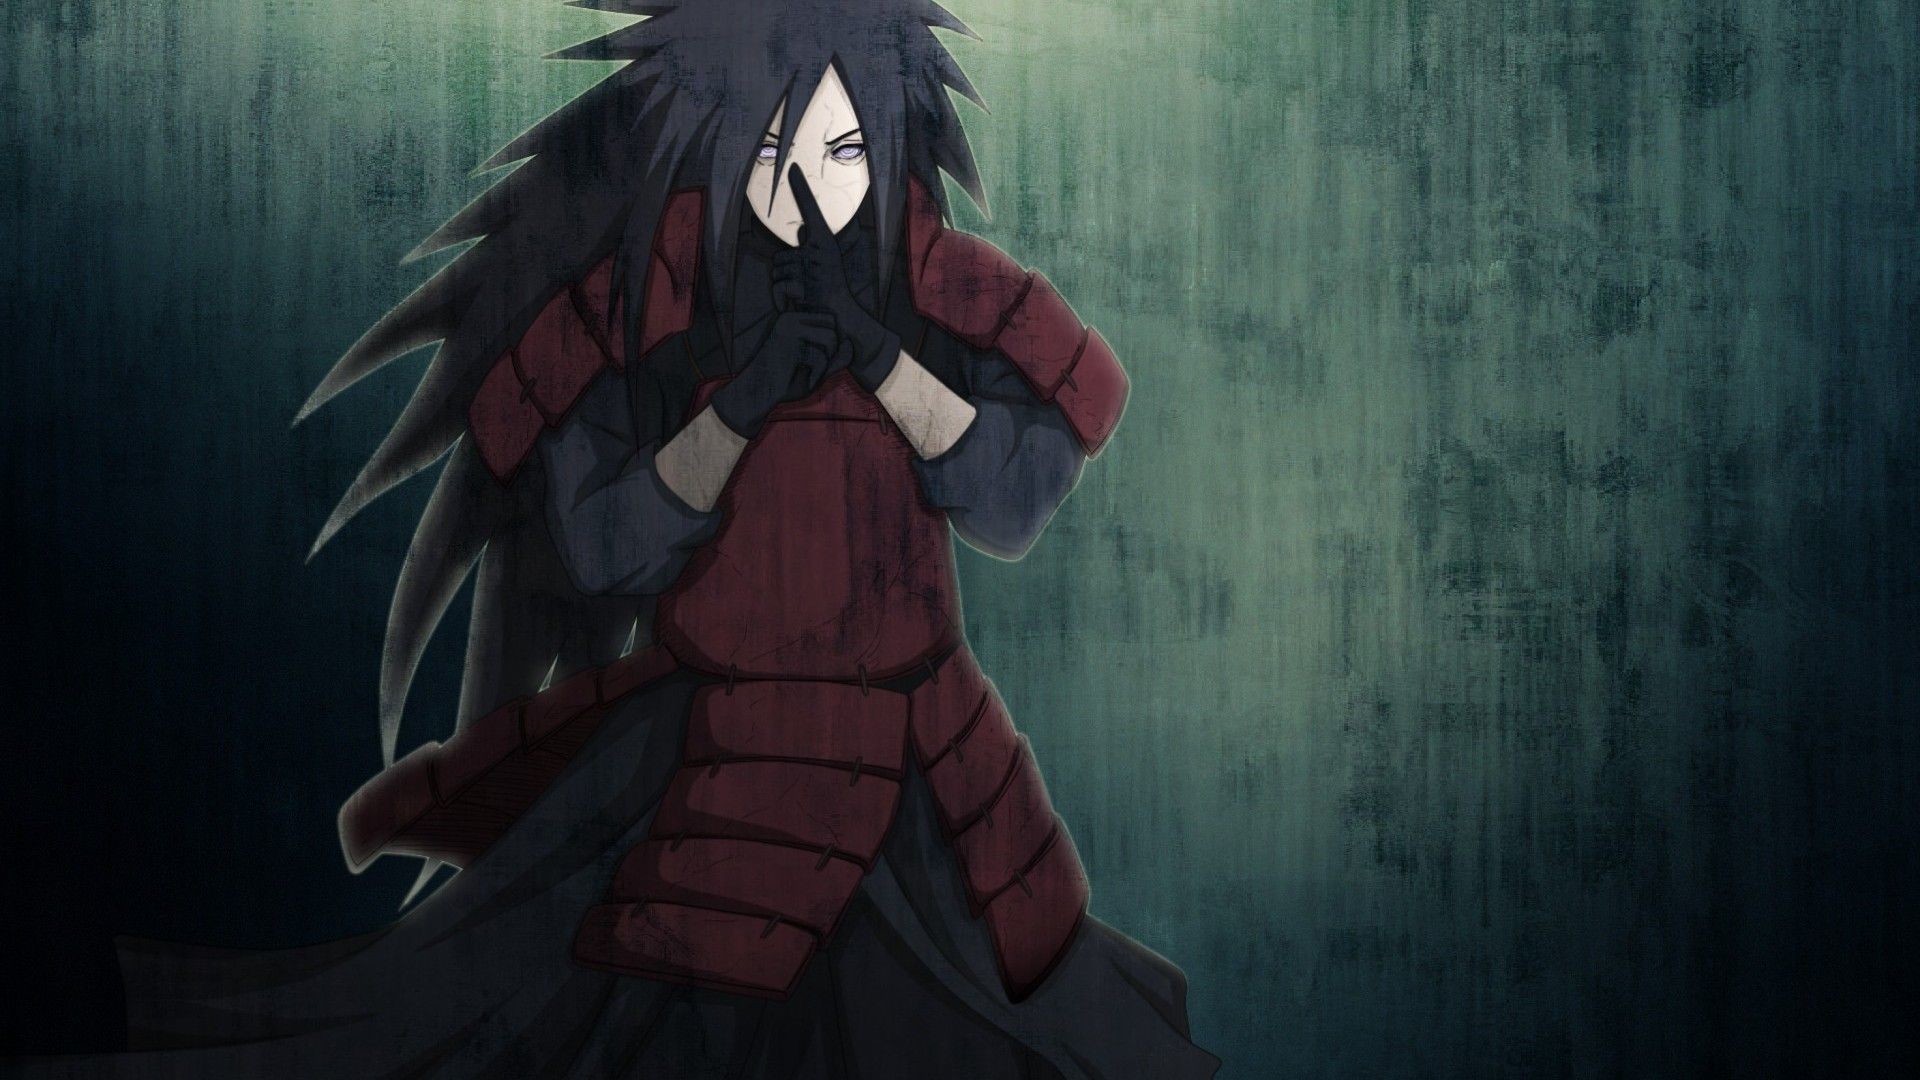 Search Results for “madara uchiha wallpaper hd” – Adorable Wallpapers